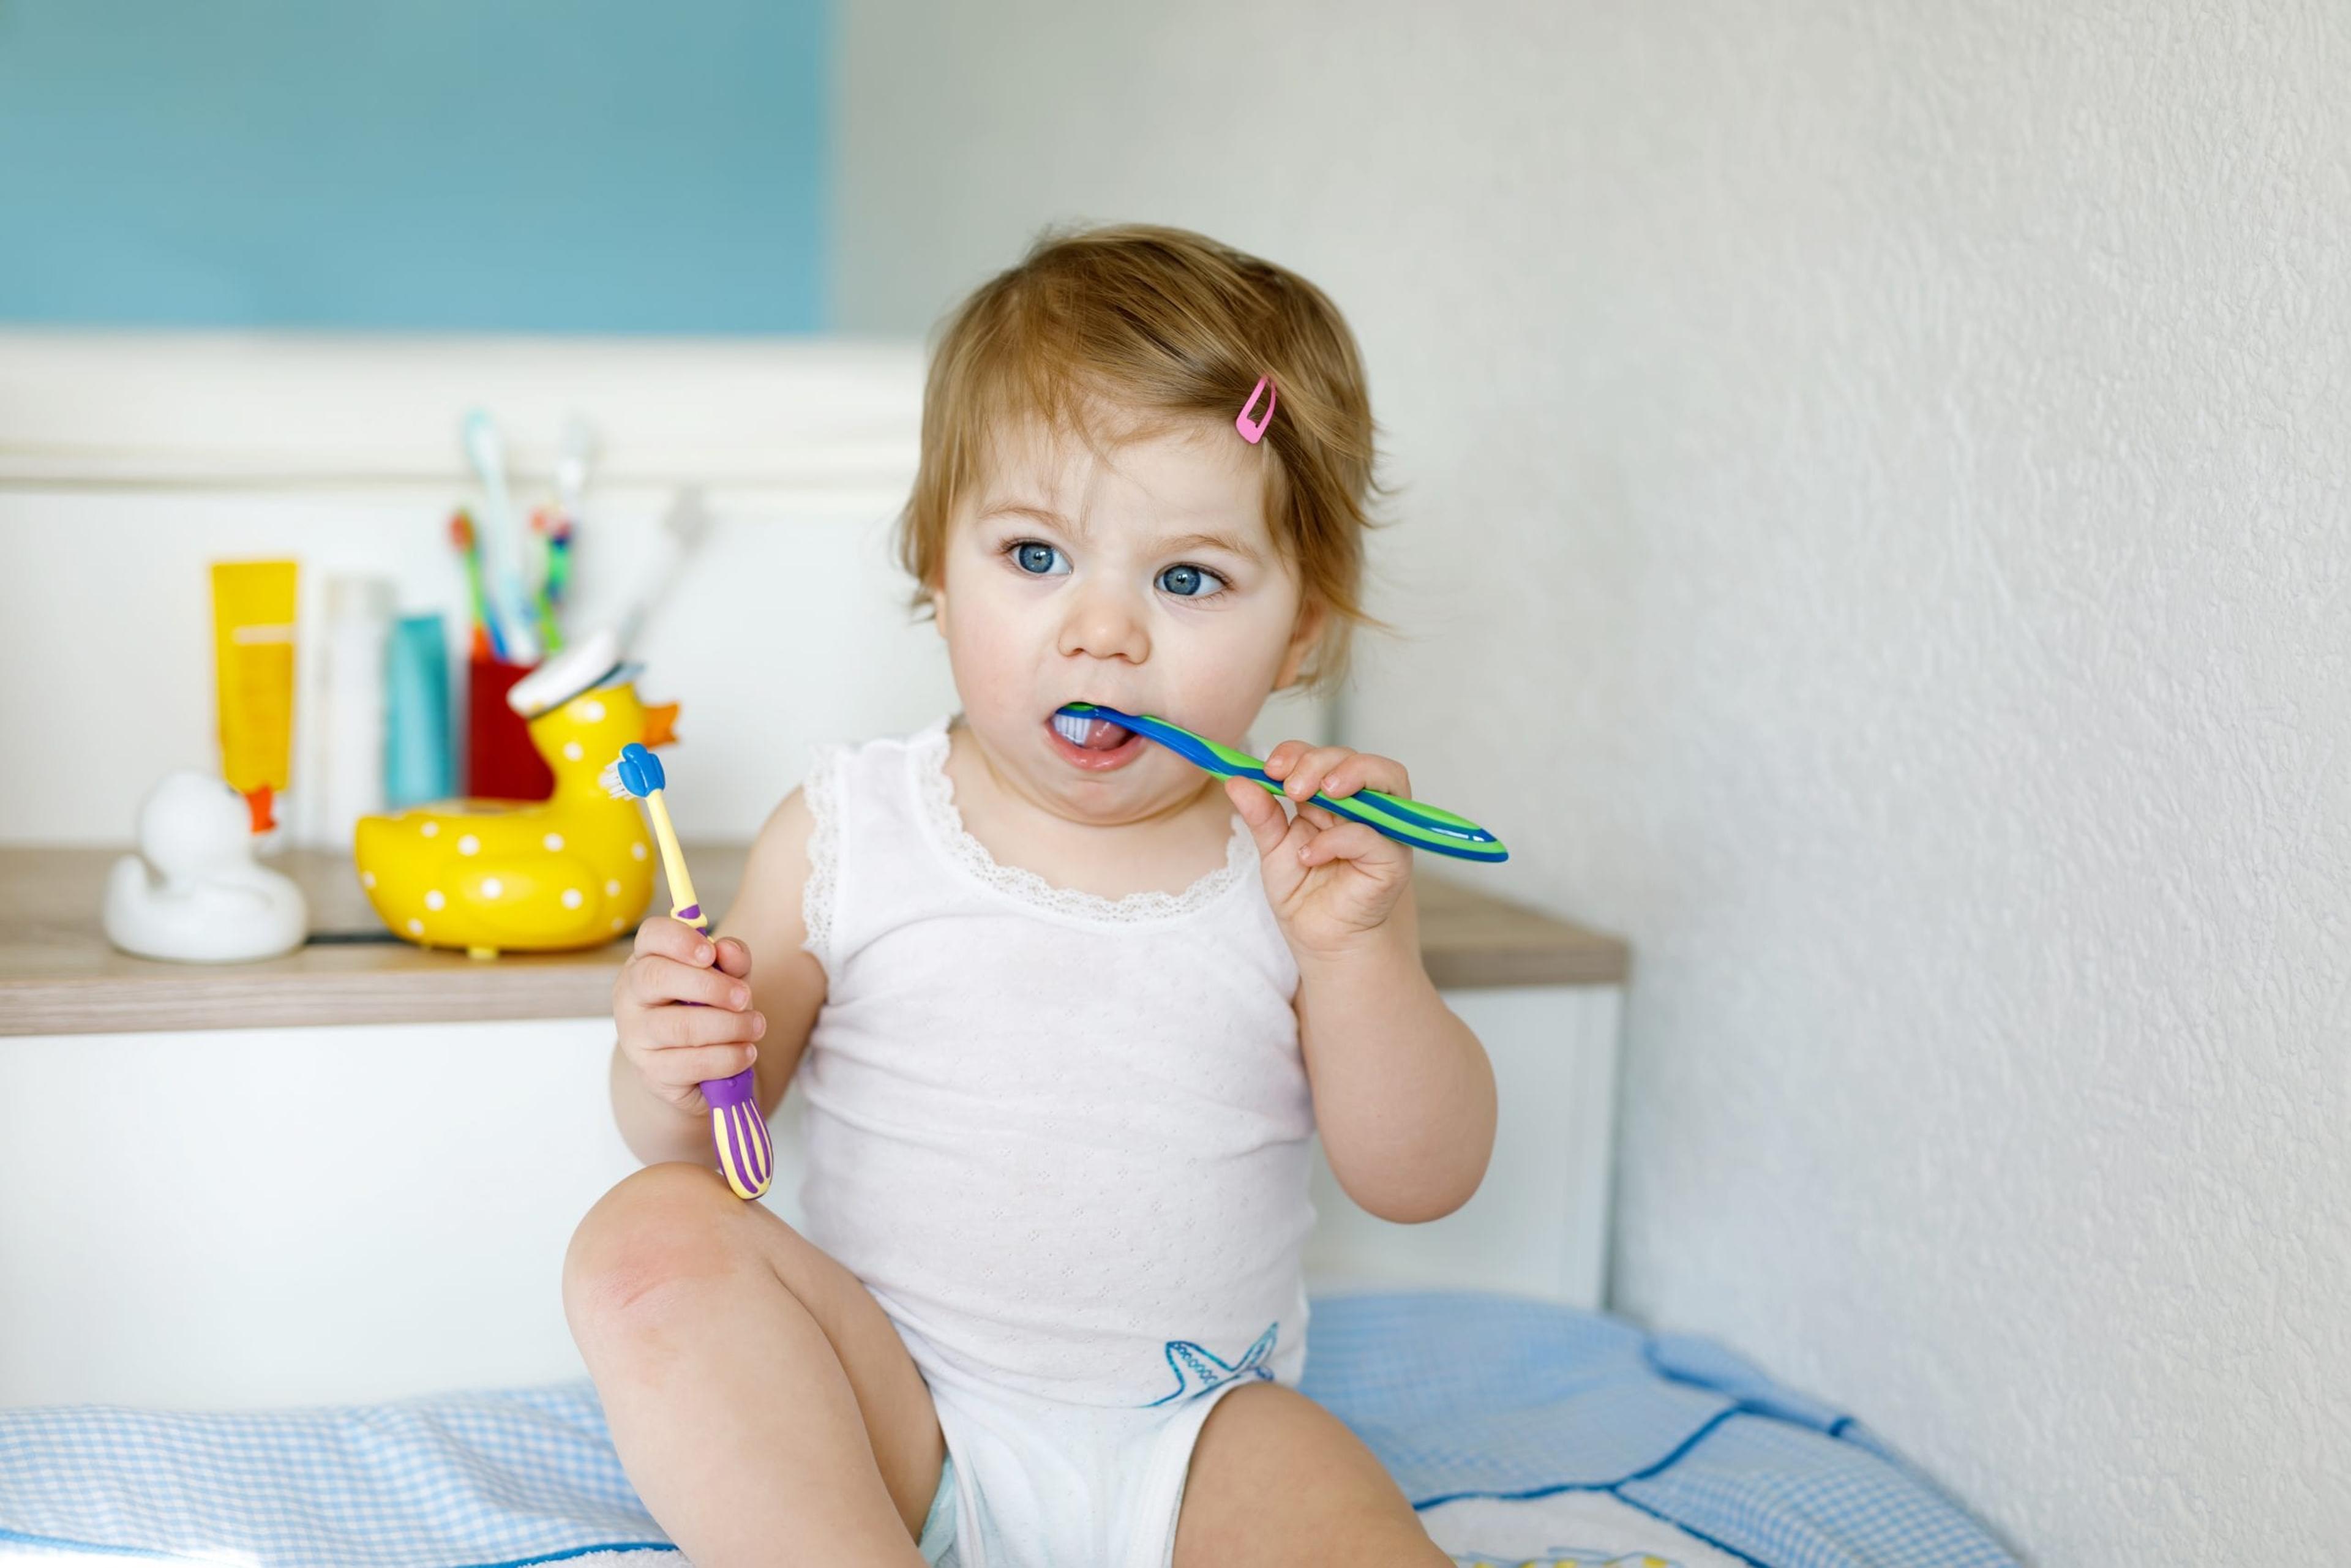 Toddler holding a toothbrush